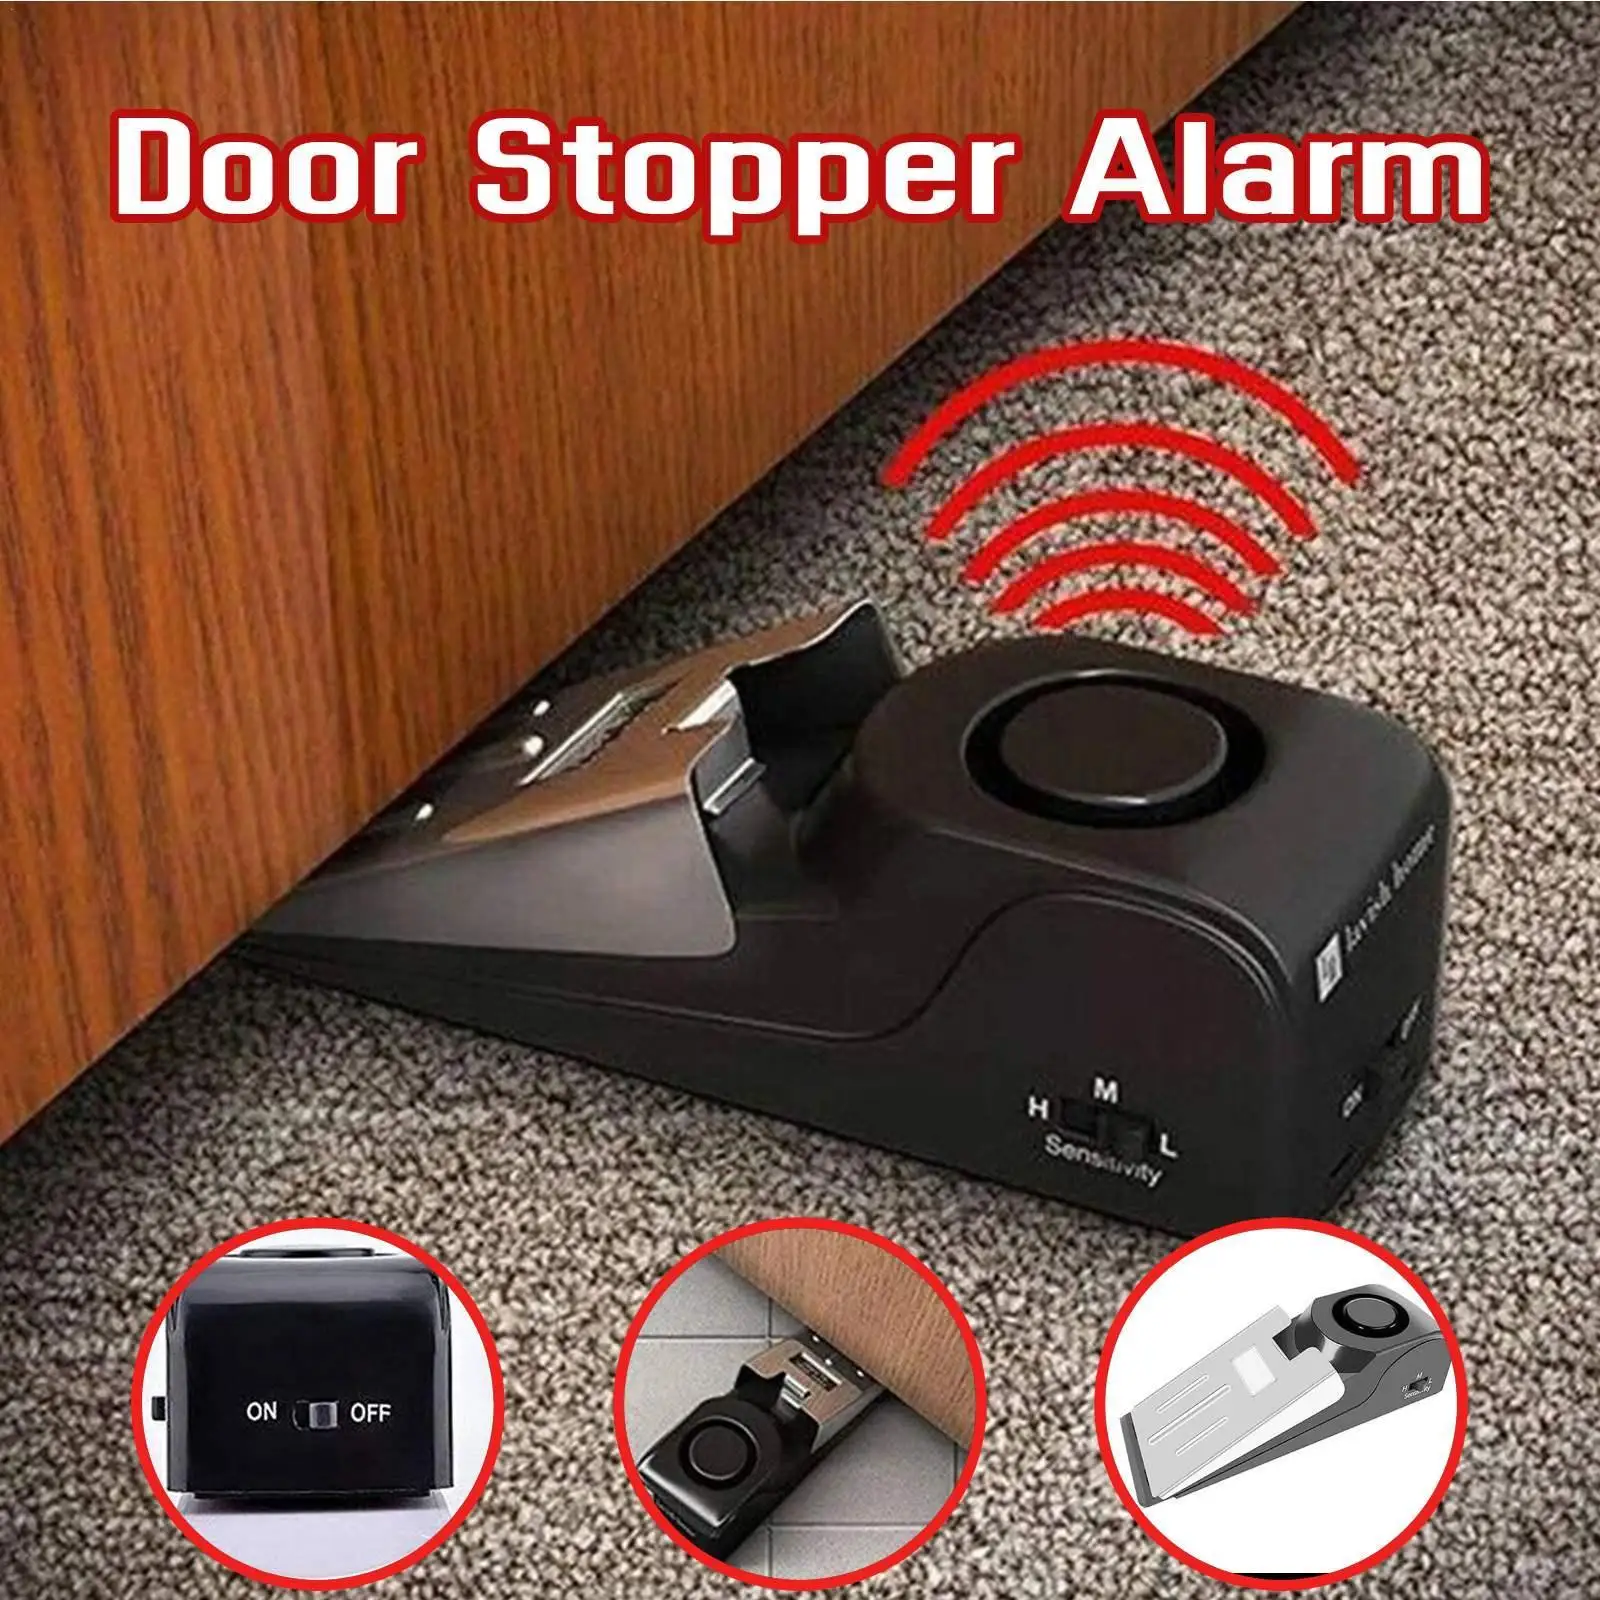 

125 DB Anti-theft Burglar Stop System Security Home Alarm System Door Block Blocking Home Wedge Stopper Shaped Safety Stop I3O4